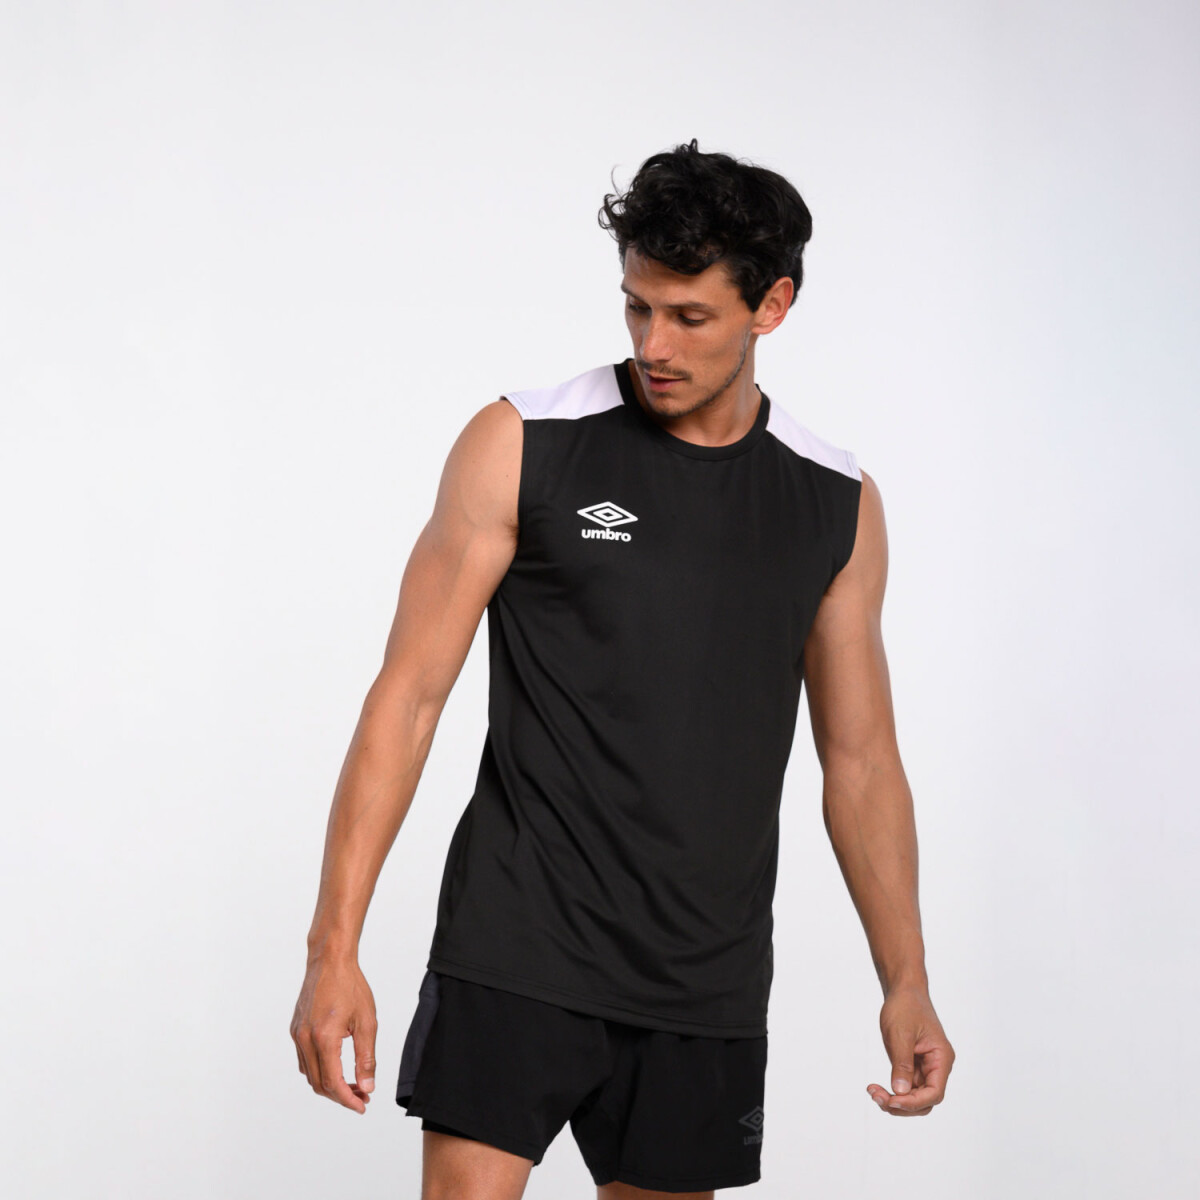 Musculosa Combined Loose Umbro Hombre - 029 